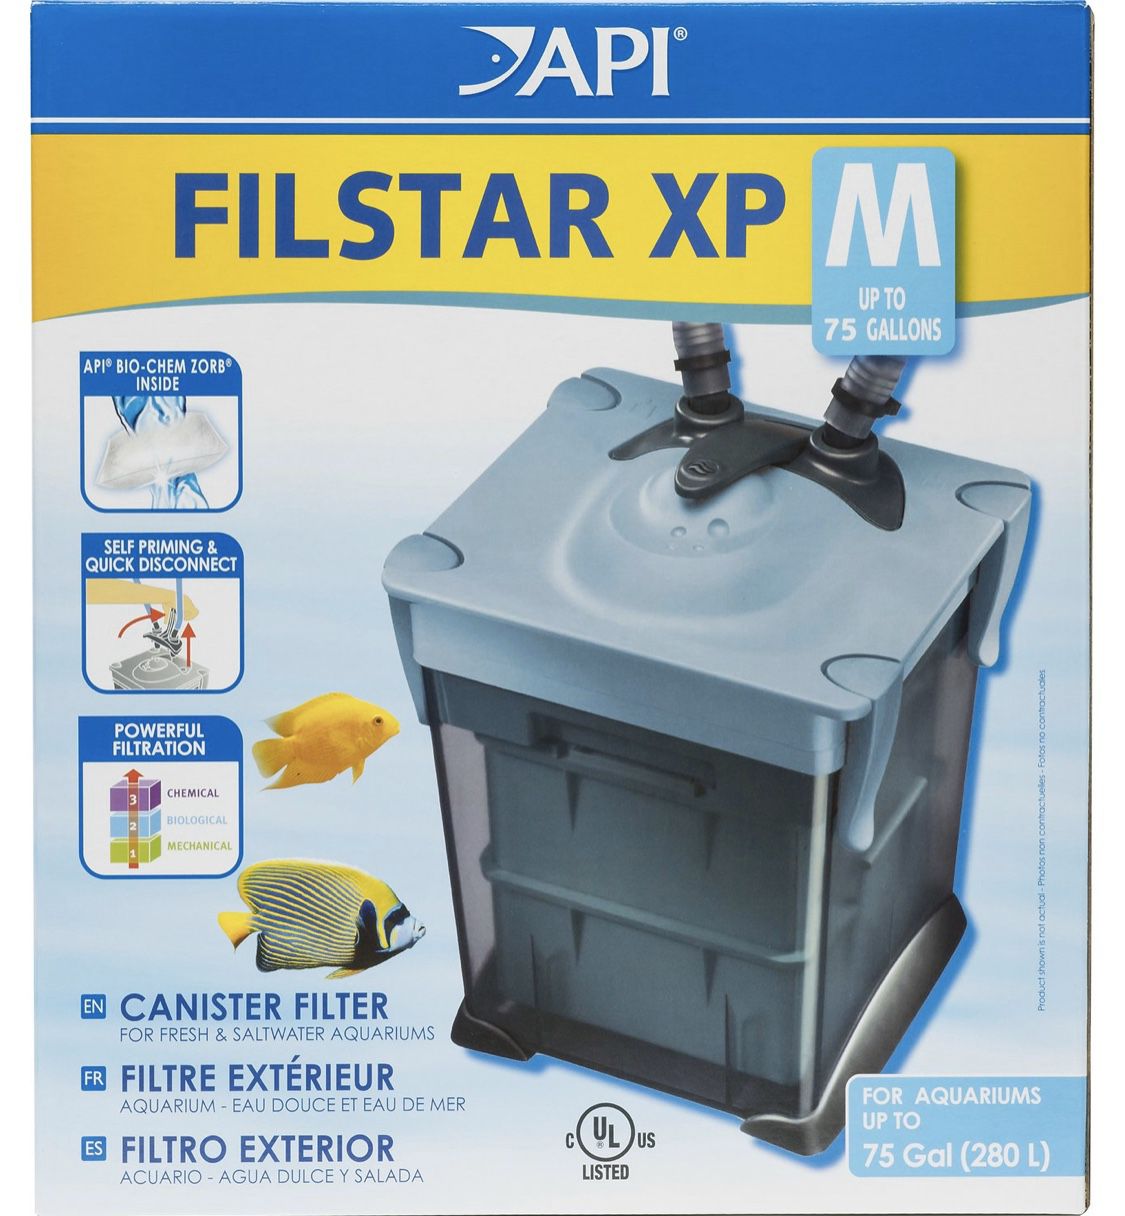 Aquarium canister filter up to 75gal